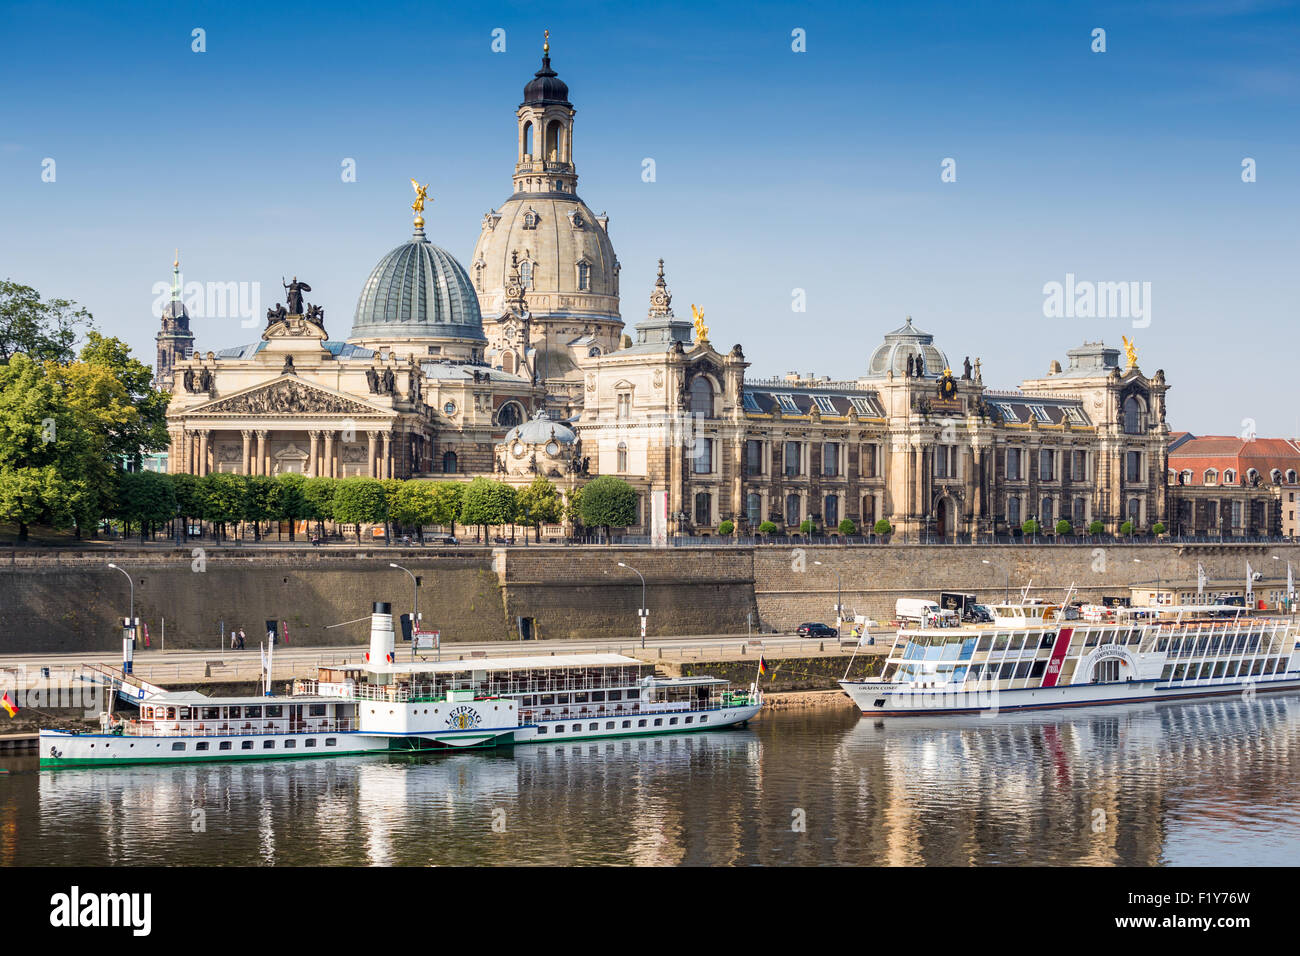 Saxony, Dresden, The city skyline with cruise boats moored on the River Elbe in front of the embankment buildings Stock Photo